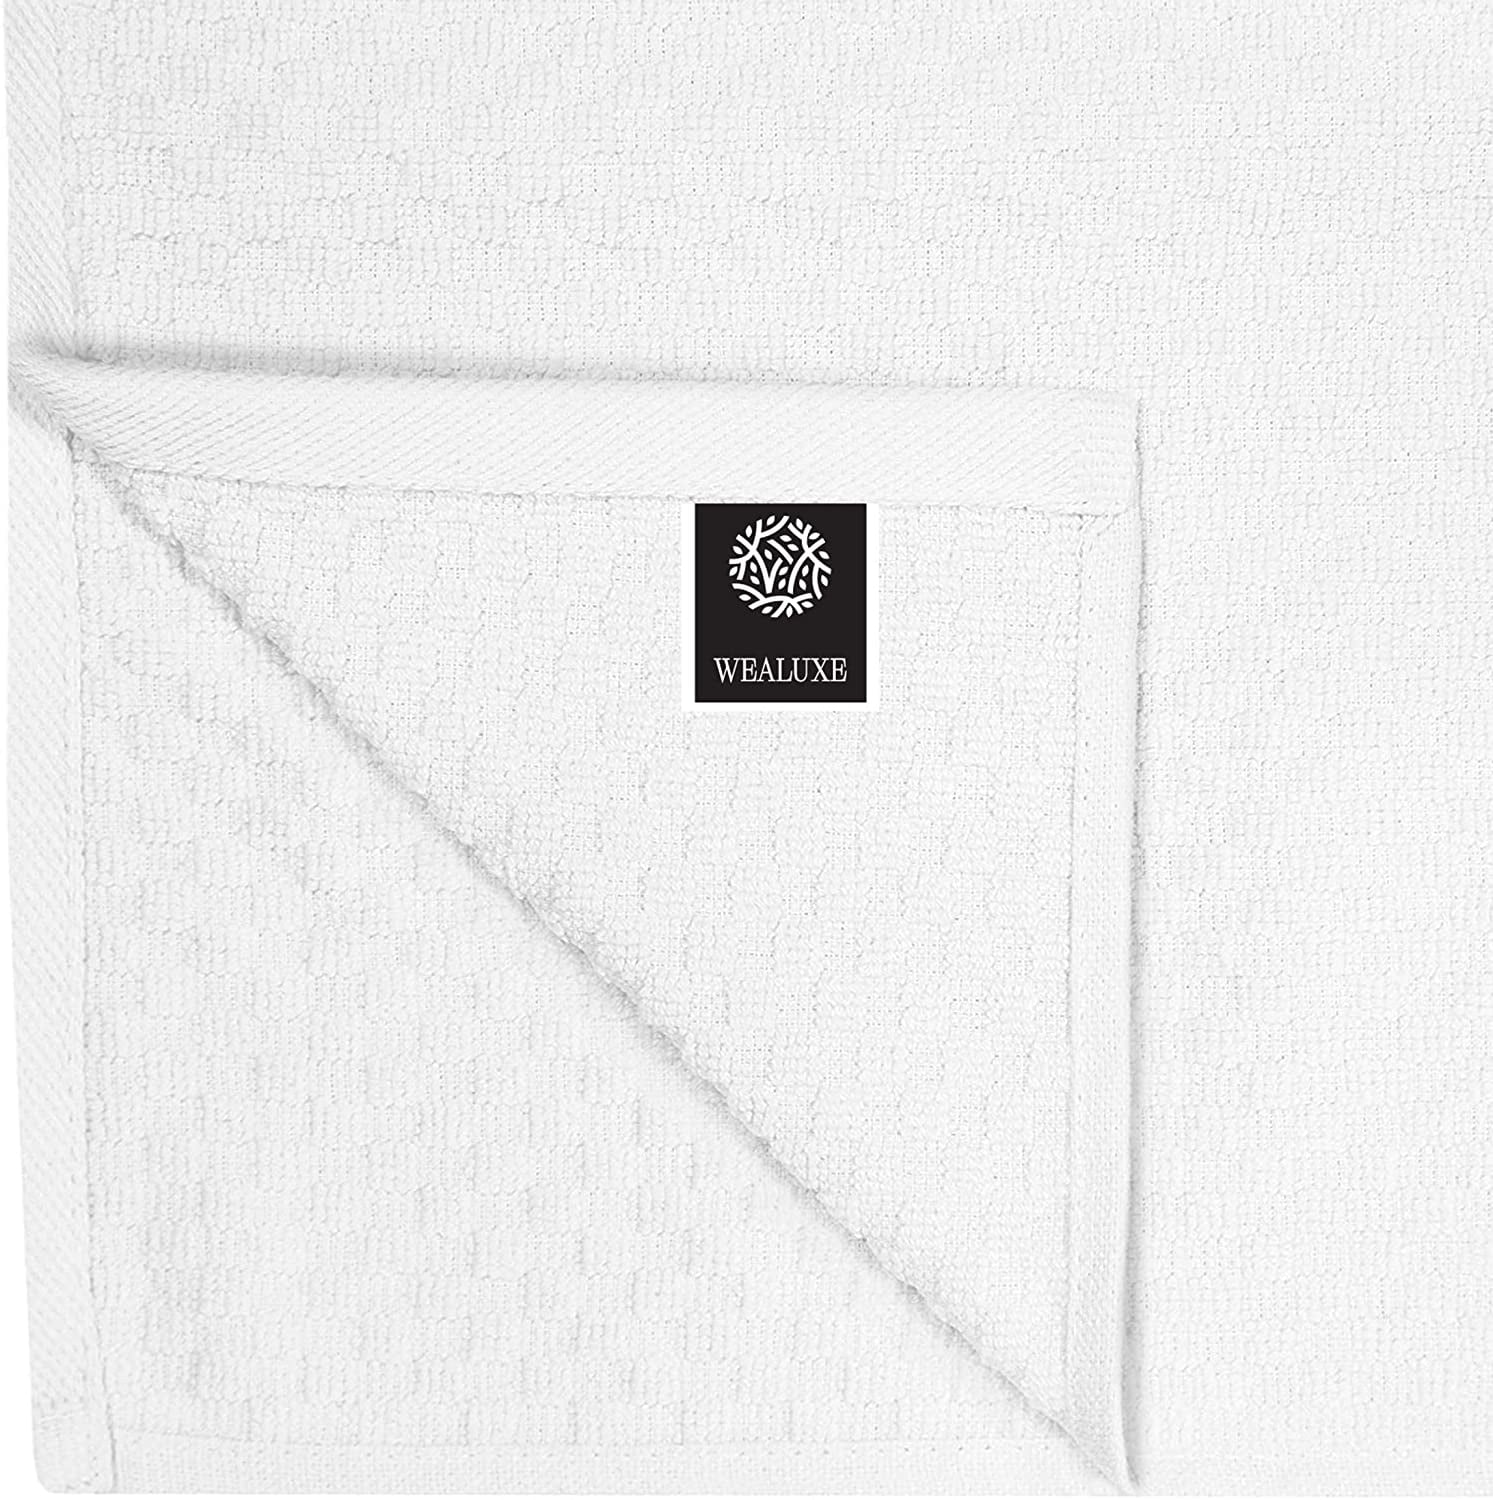 Zeppoli Kitchen Hand Towels 12 Pack - 100% Soft Cotton - 15 x 25 - Dobby  Weave - Gray Dish Towels for - Super Absorbent Cleaning Cloths